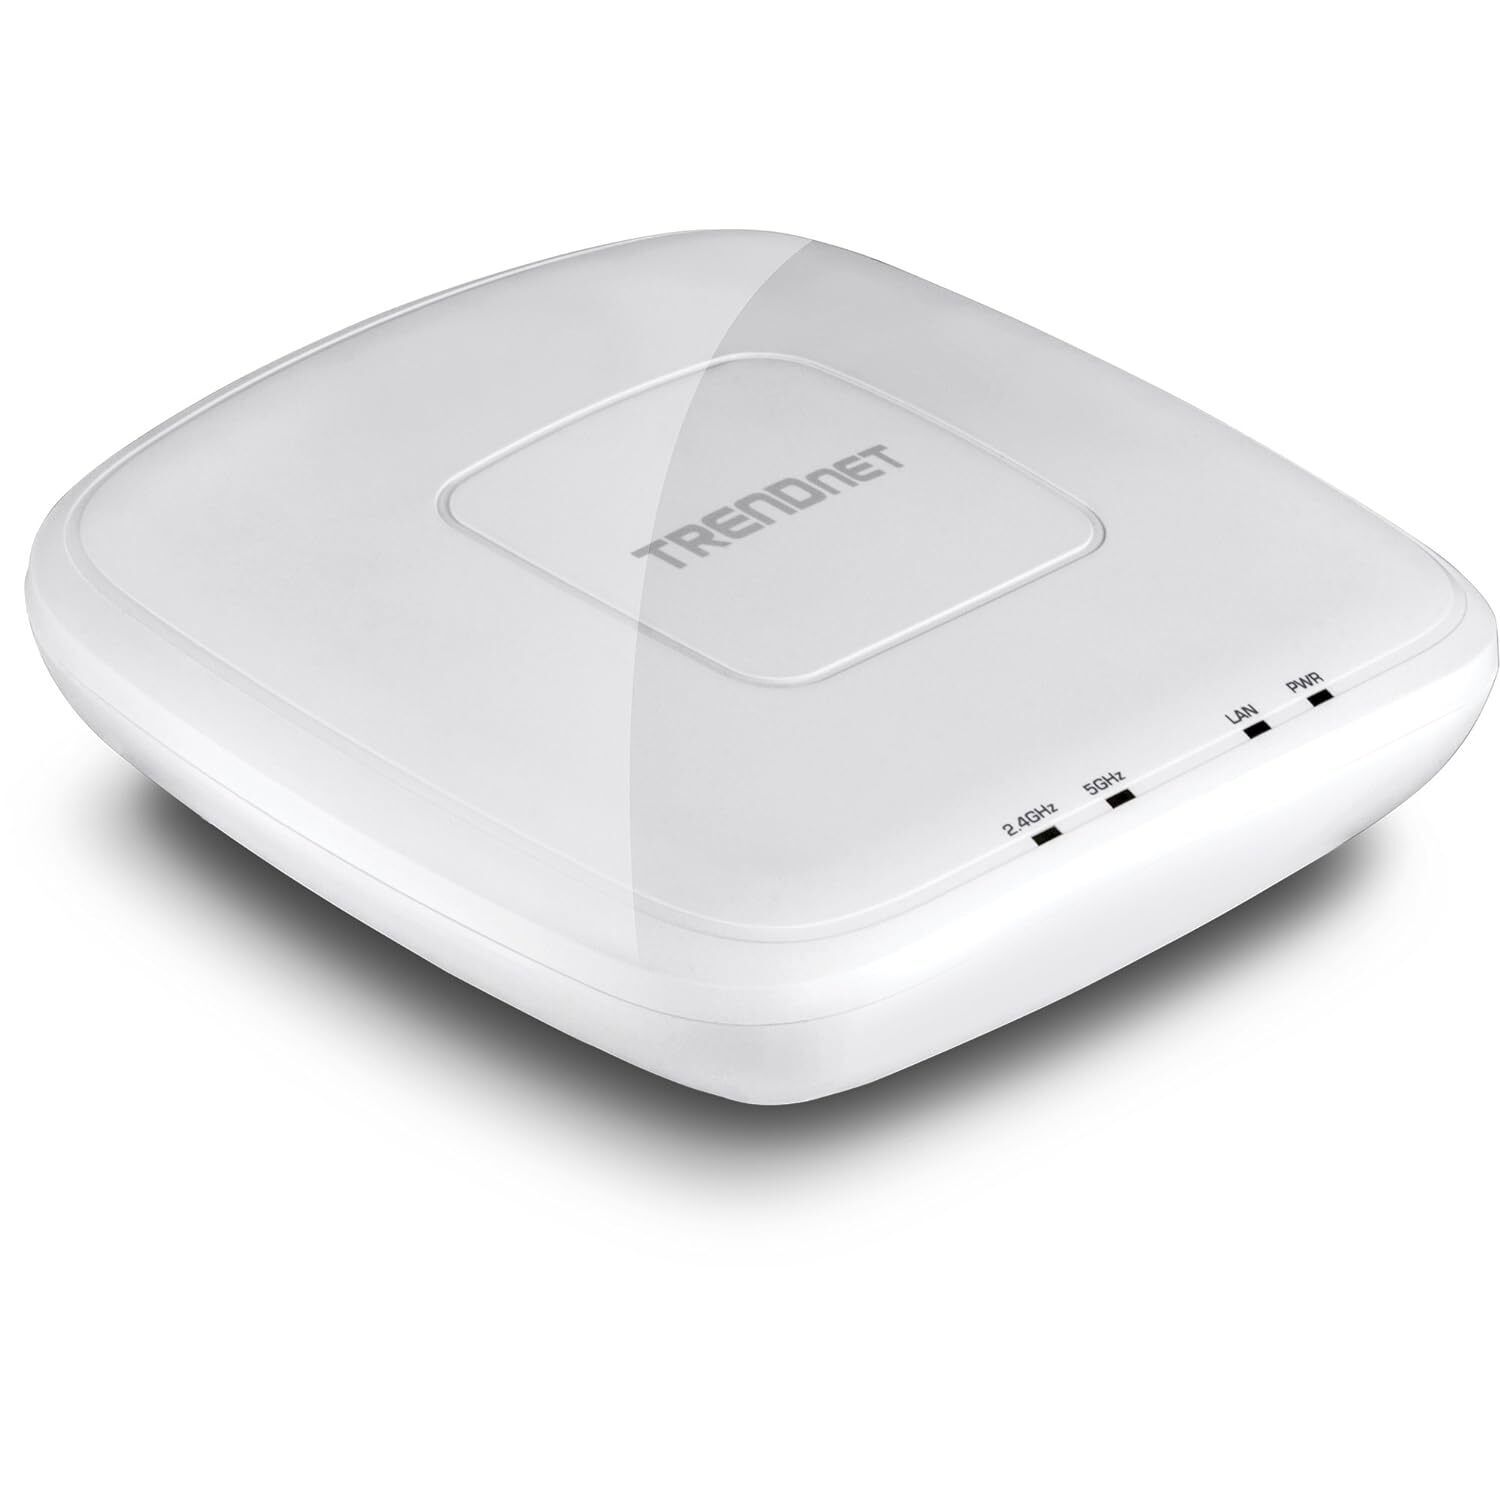 TRENDnet AC1750 Dual Band PoE Access Point, TEW-825DAP, 1300Mbps WiFi AC+450 M